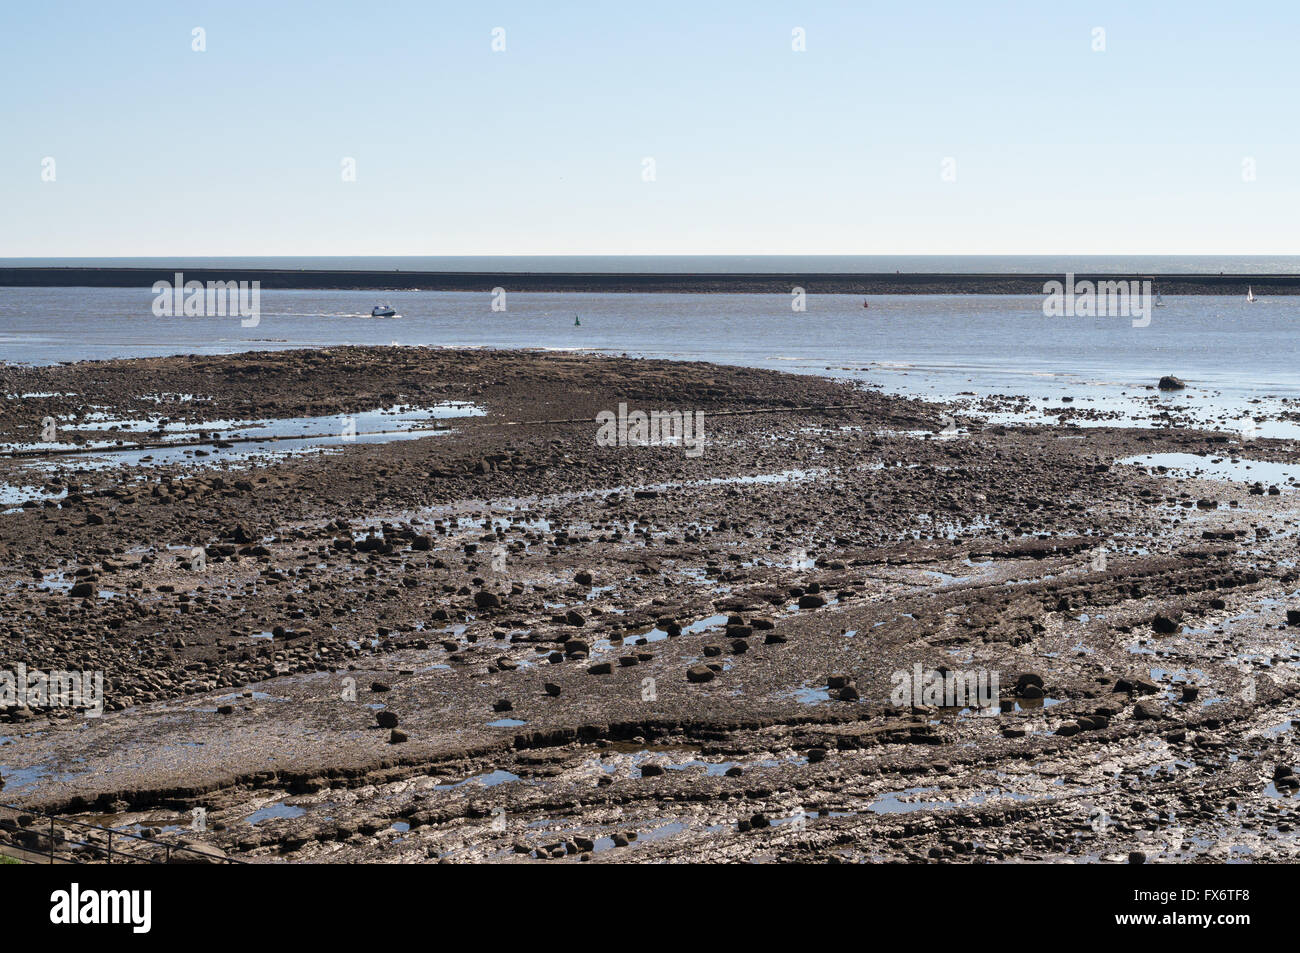 The Black Middens rocks exposed at low tide within the Tyne estuary, Tynemouth, north east England, UK Stock Photo